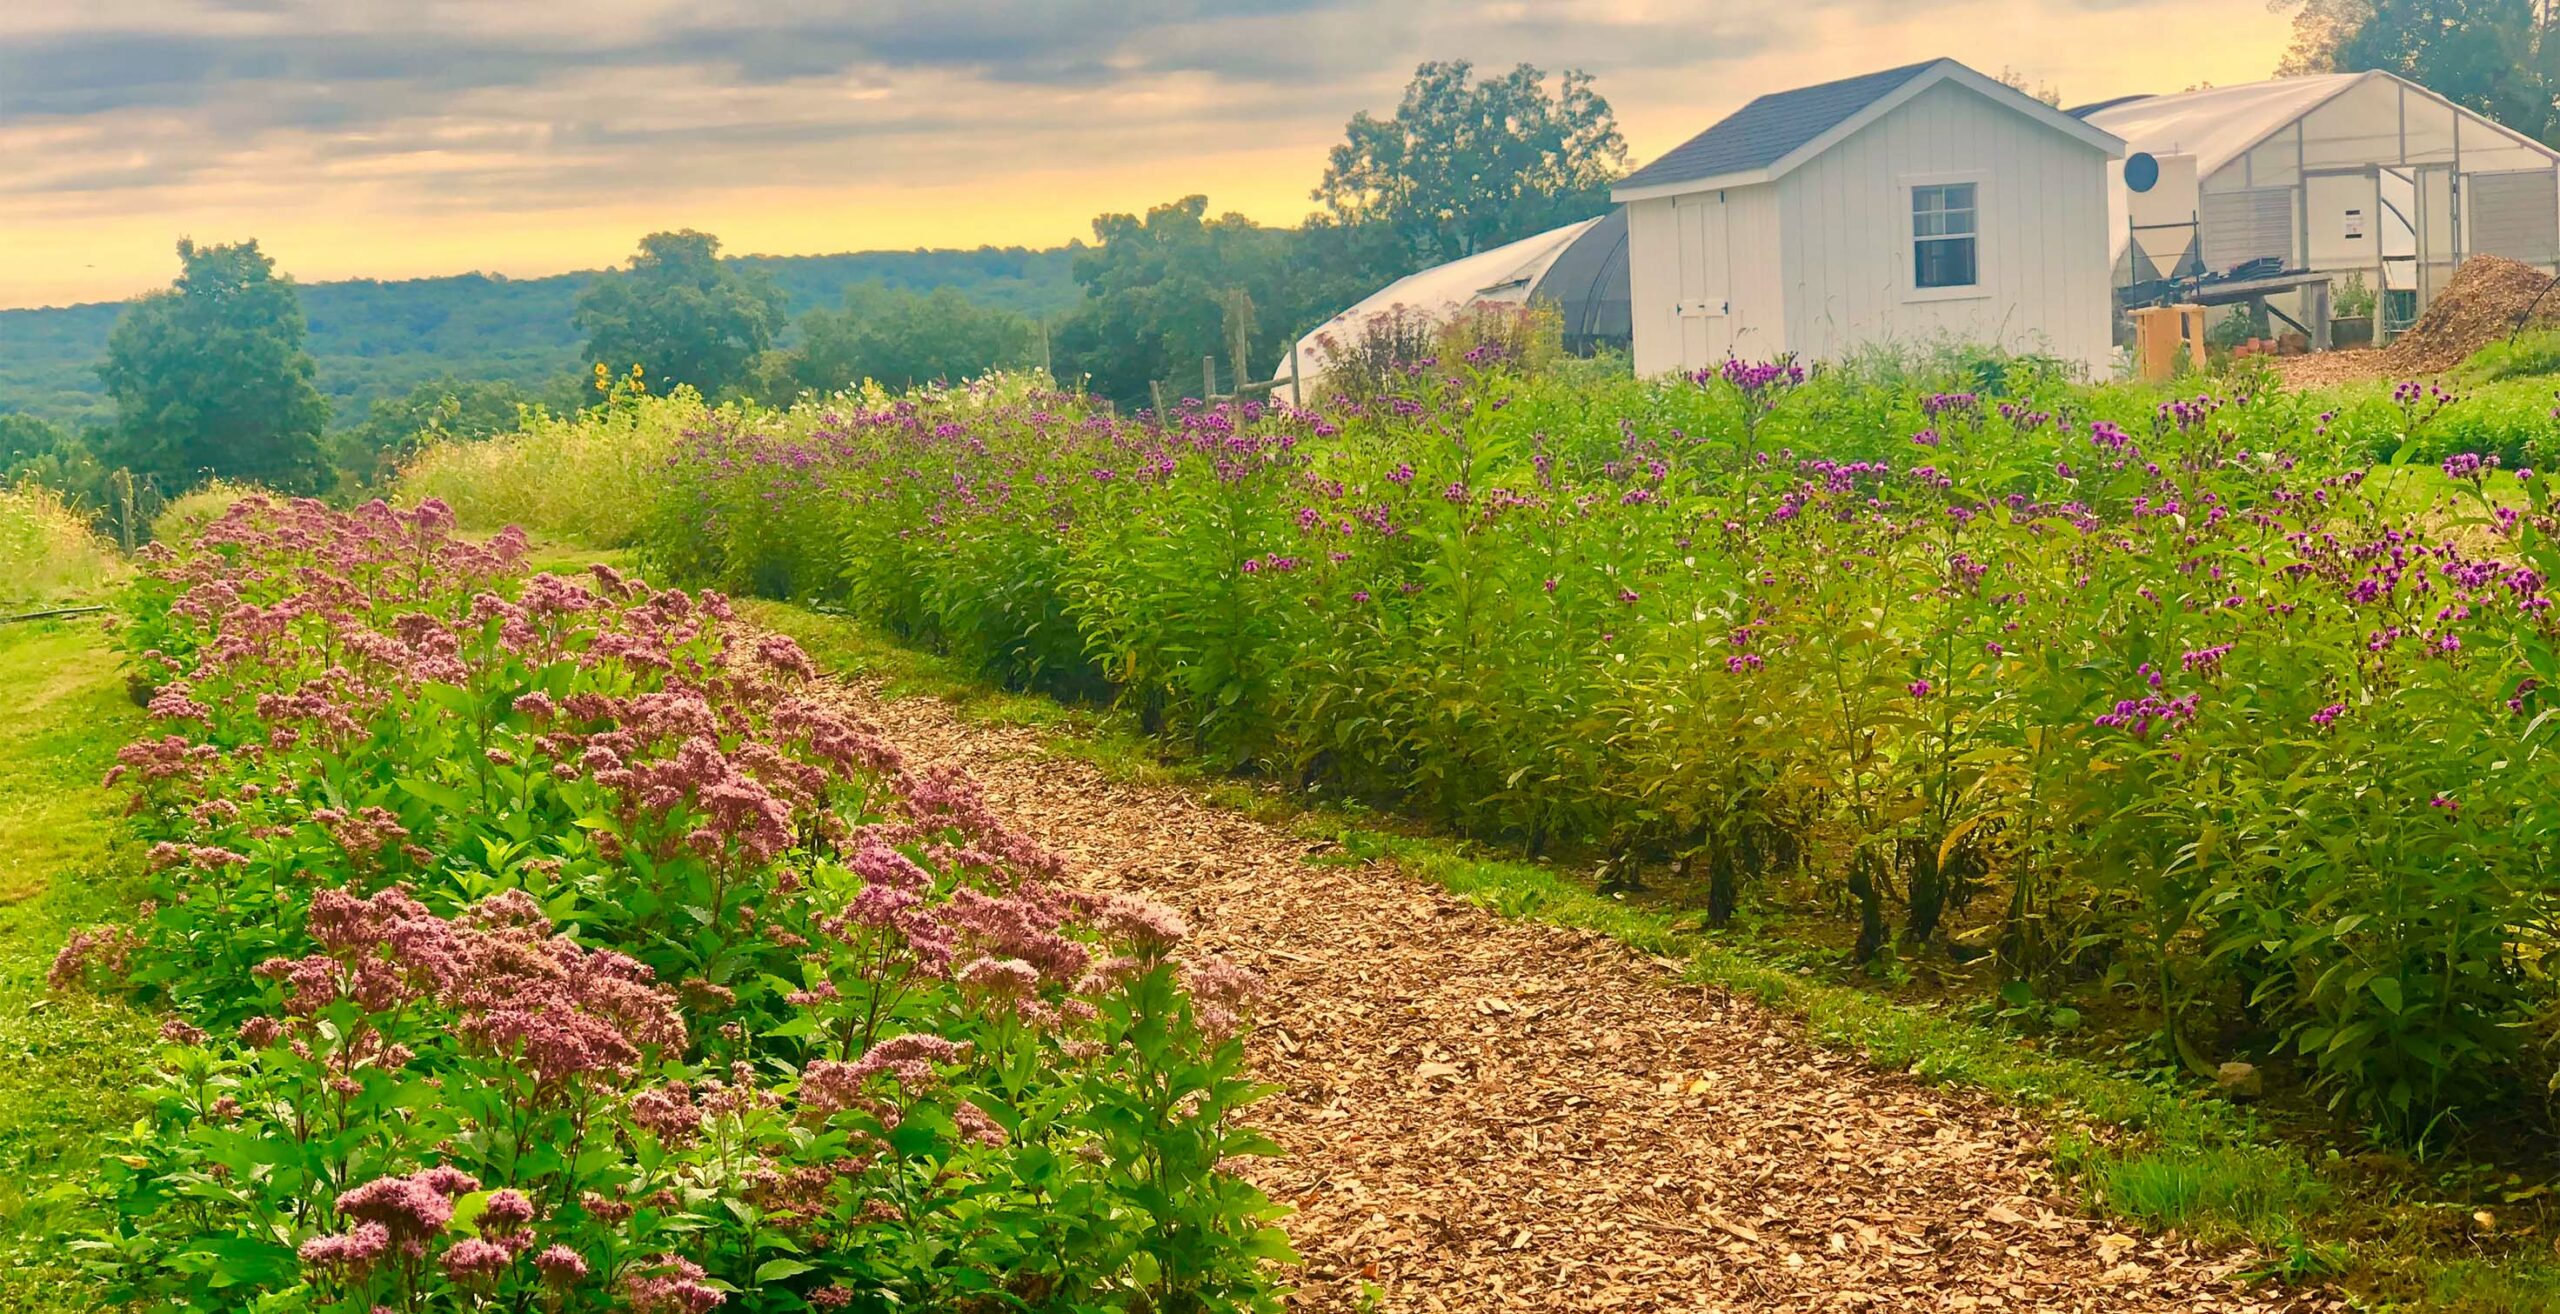 Coastal plain Joe Pye weed and New York ironweed grow in seed increase plots at The Hickories in Connecticut.